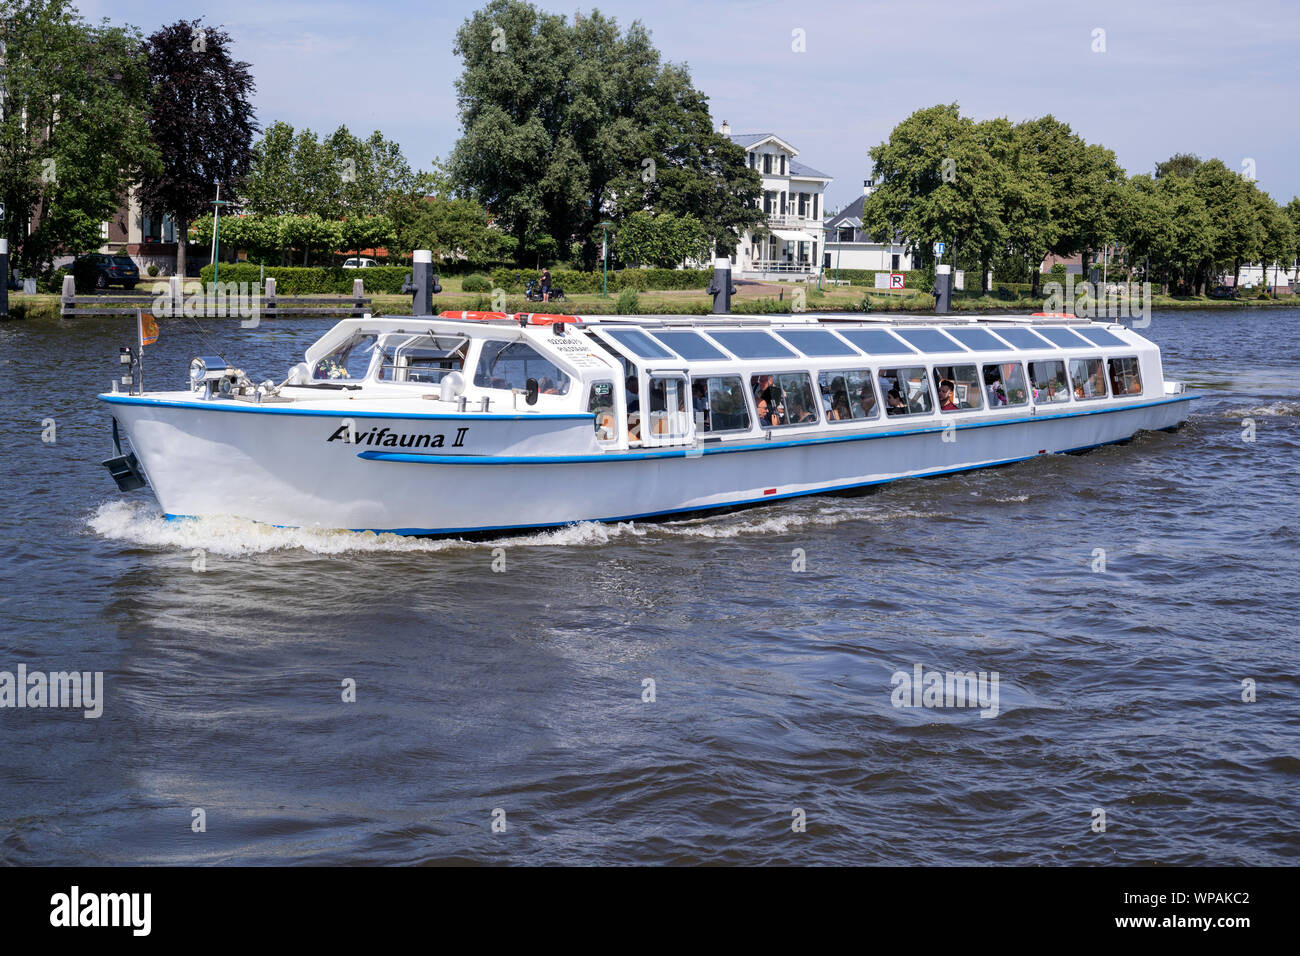 Excursion boat AVIVAUNA II on canal cruise. Van der Valk is the largest Dutch hospitality chain and also operates the Avifauna Bird Park. Stock Photo